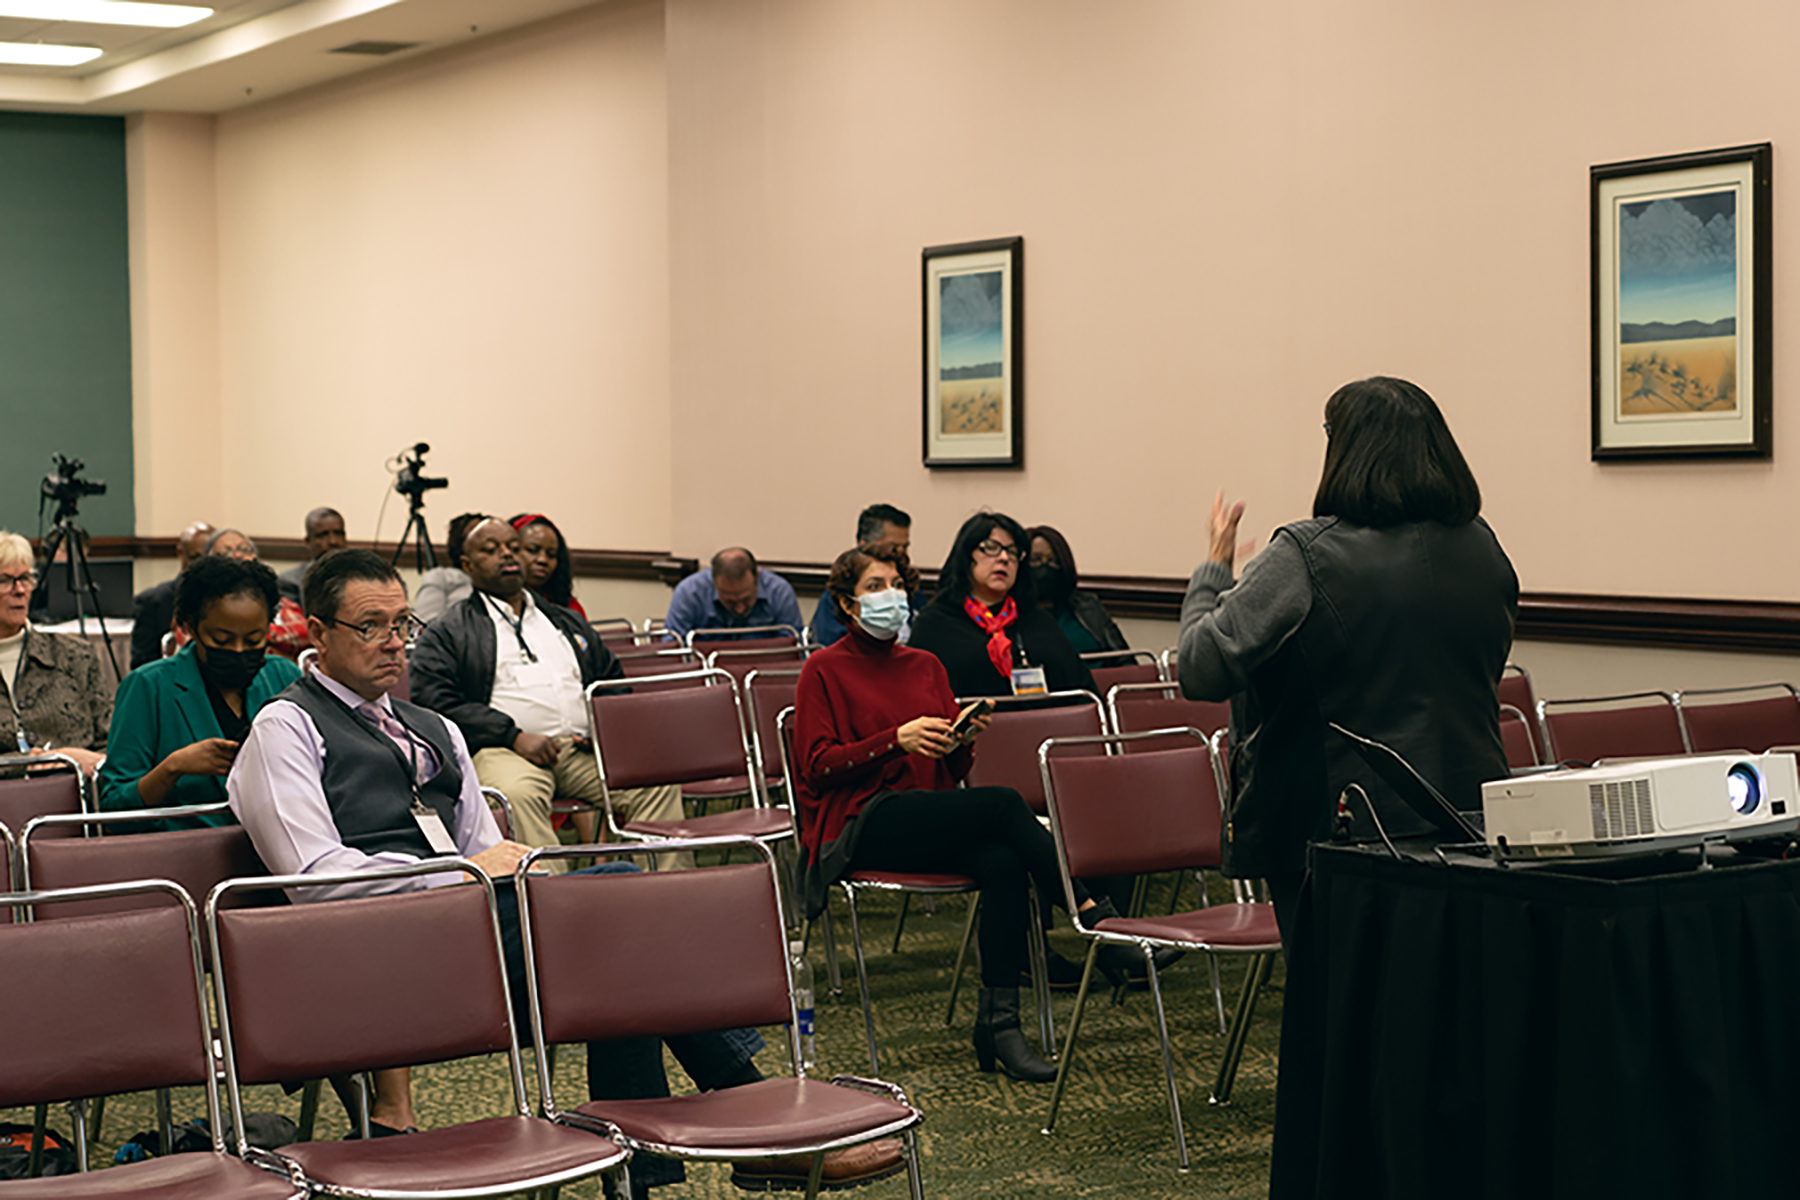 Evelyn Sullivan, North American Division (NAD) Early Childhood Education director, facilitating a seminar at the NAD's Adventist Ministries Convention